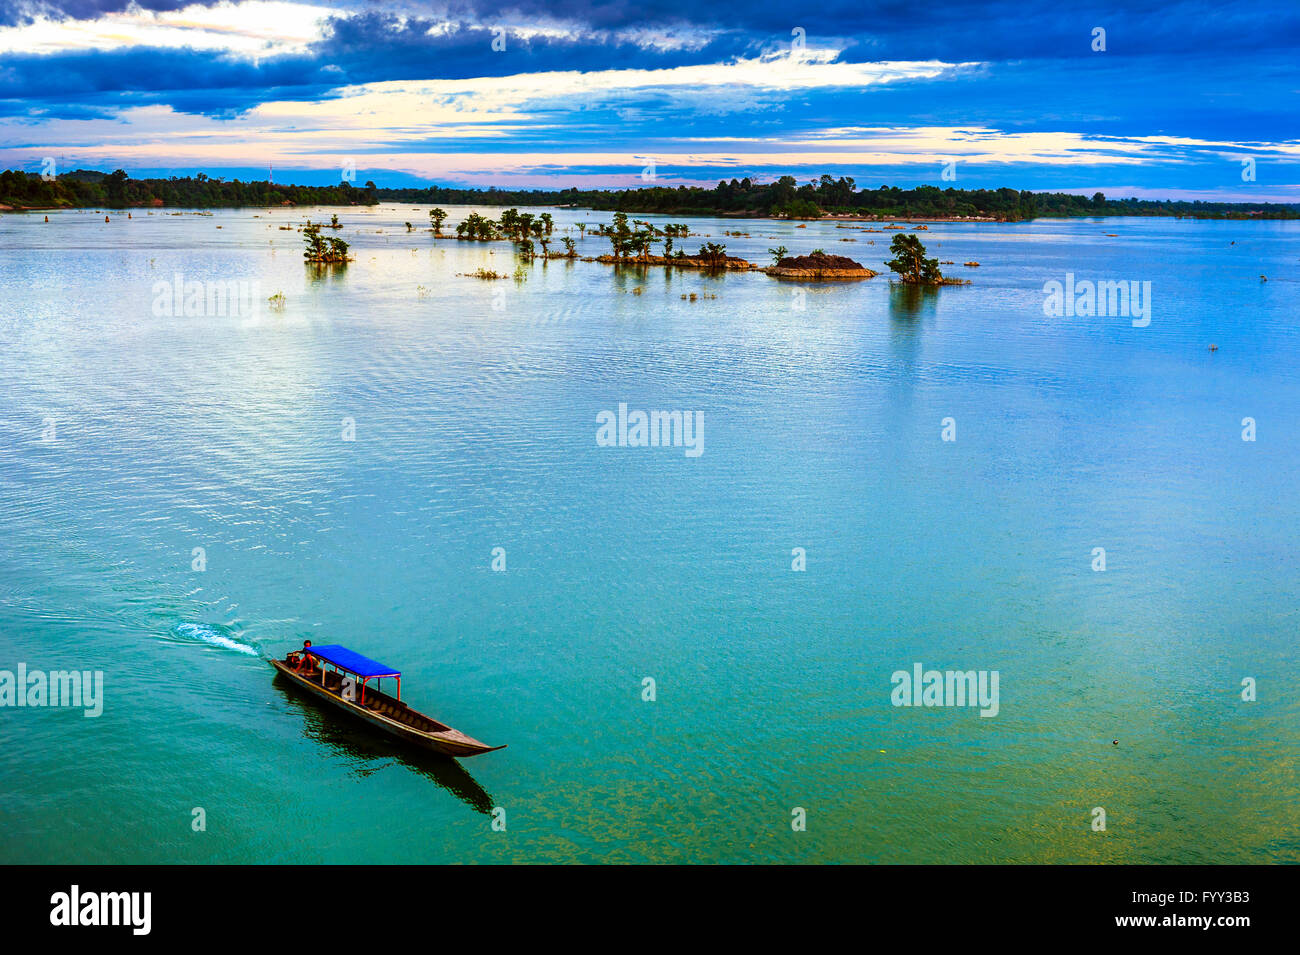 Asia. South-East Asia. Laos. Province of Champassak. 4000 islands. Don Khon island. The Mekong to the Cambodian border. Stock Photo